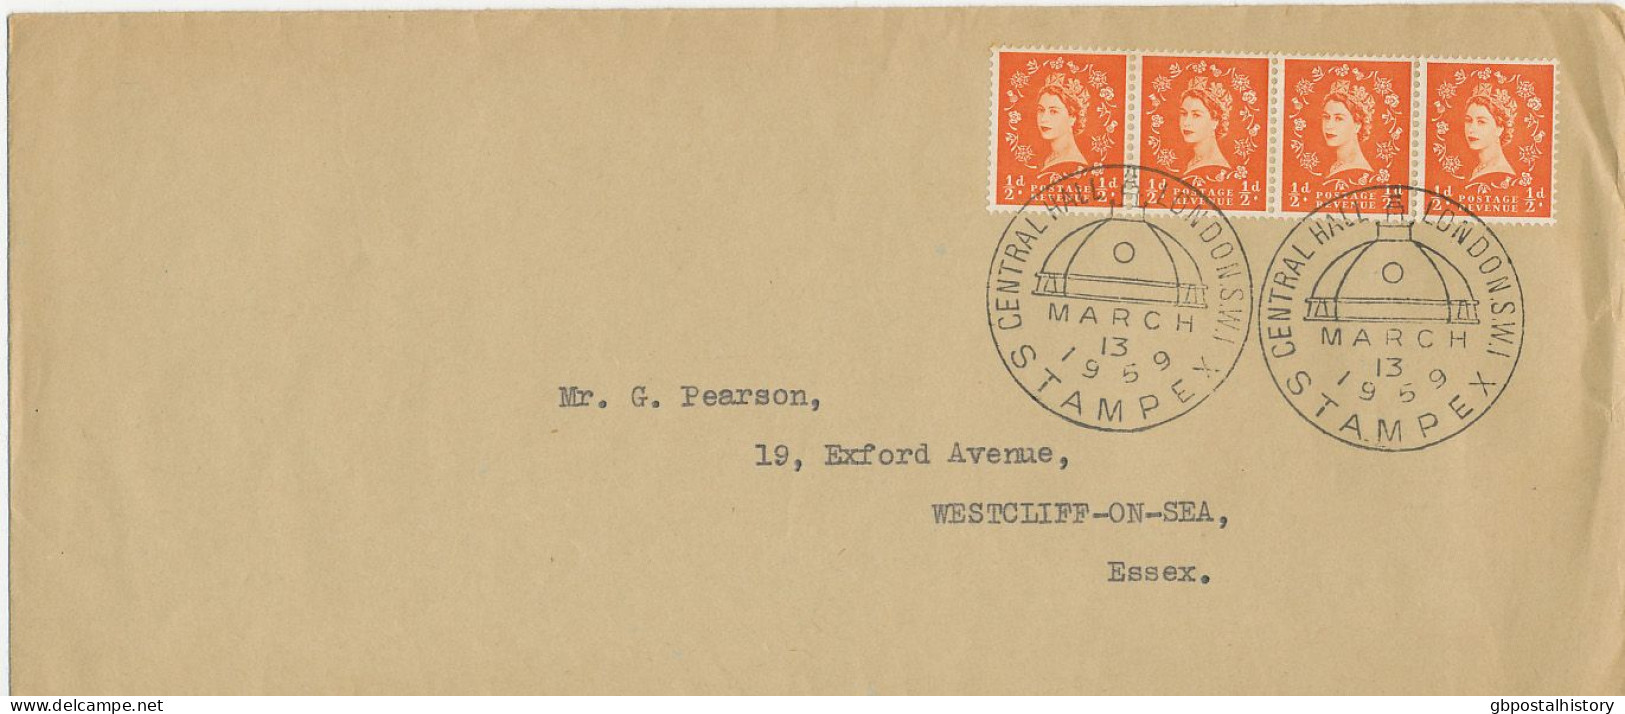 GB SPECIAL EVENT POSTMARKS 1959 STAMPEX CENTRAL HALL LONDON S.W.I. ADDRESSED TO GEORGE PEARSON - Lettres & Documents